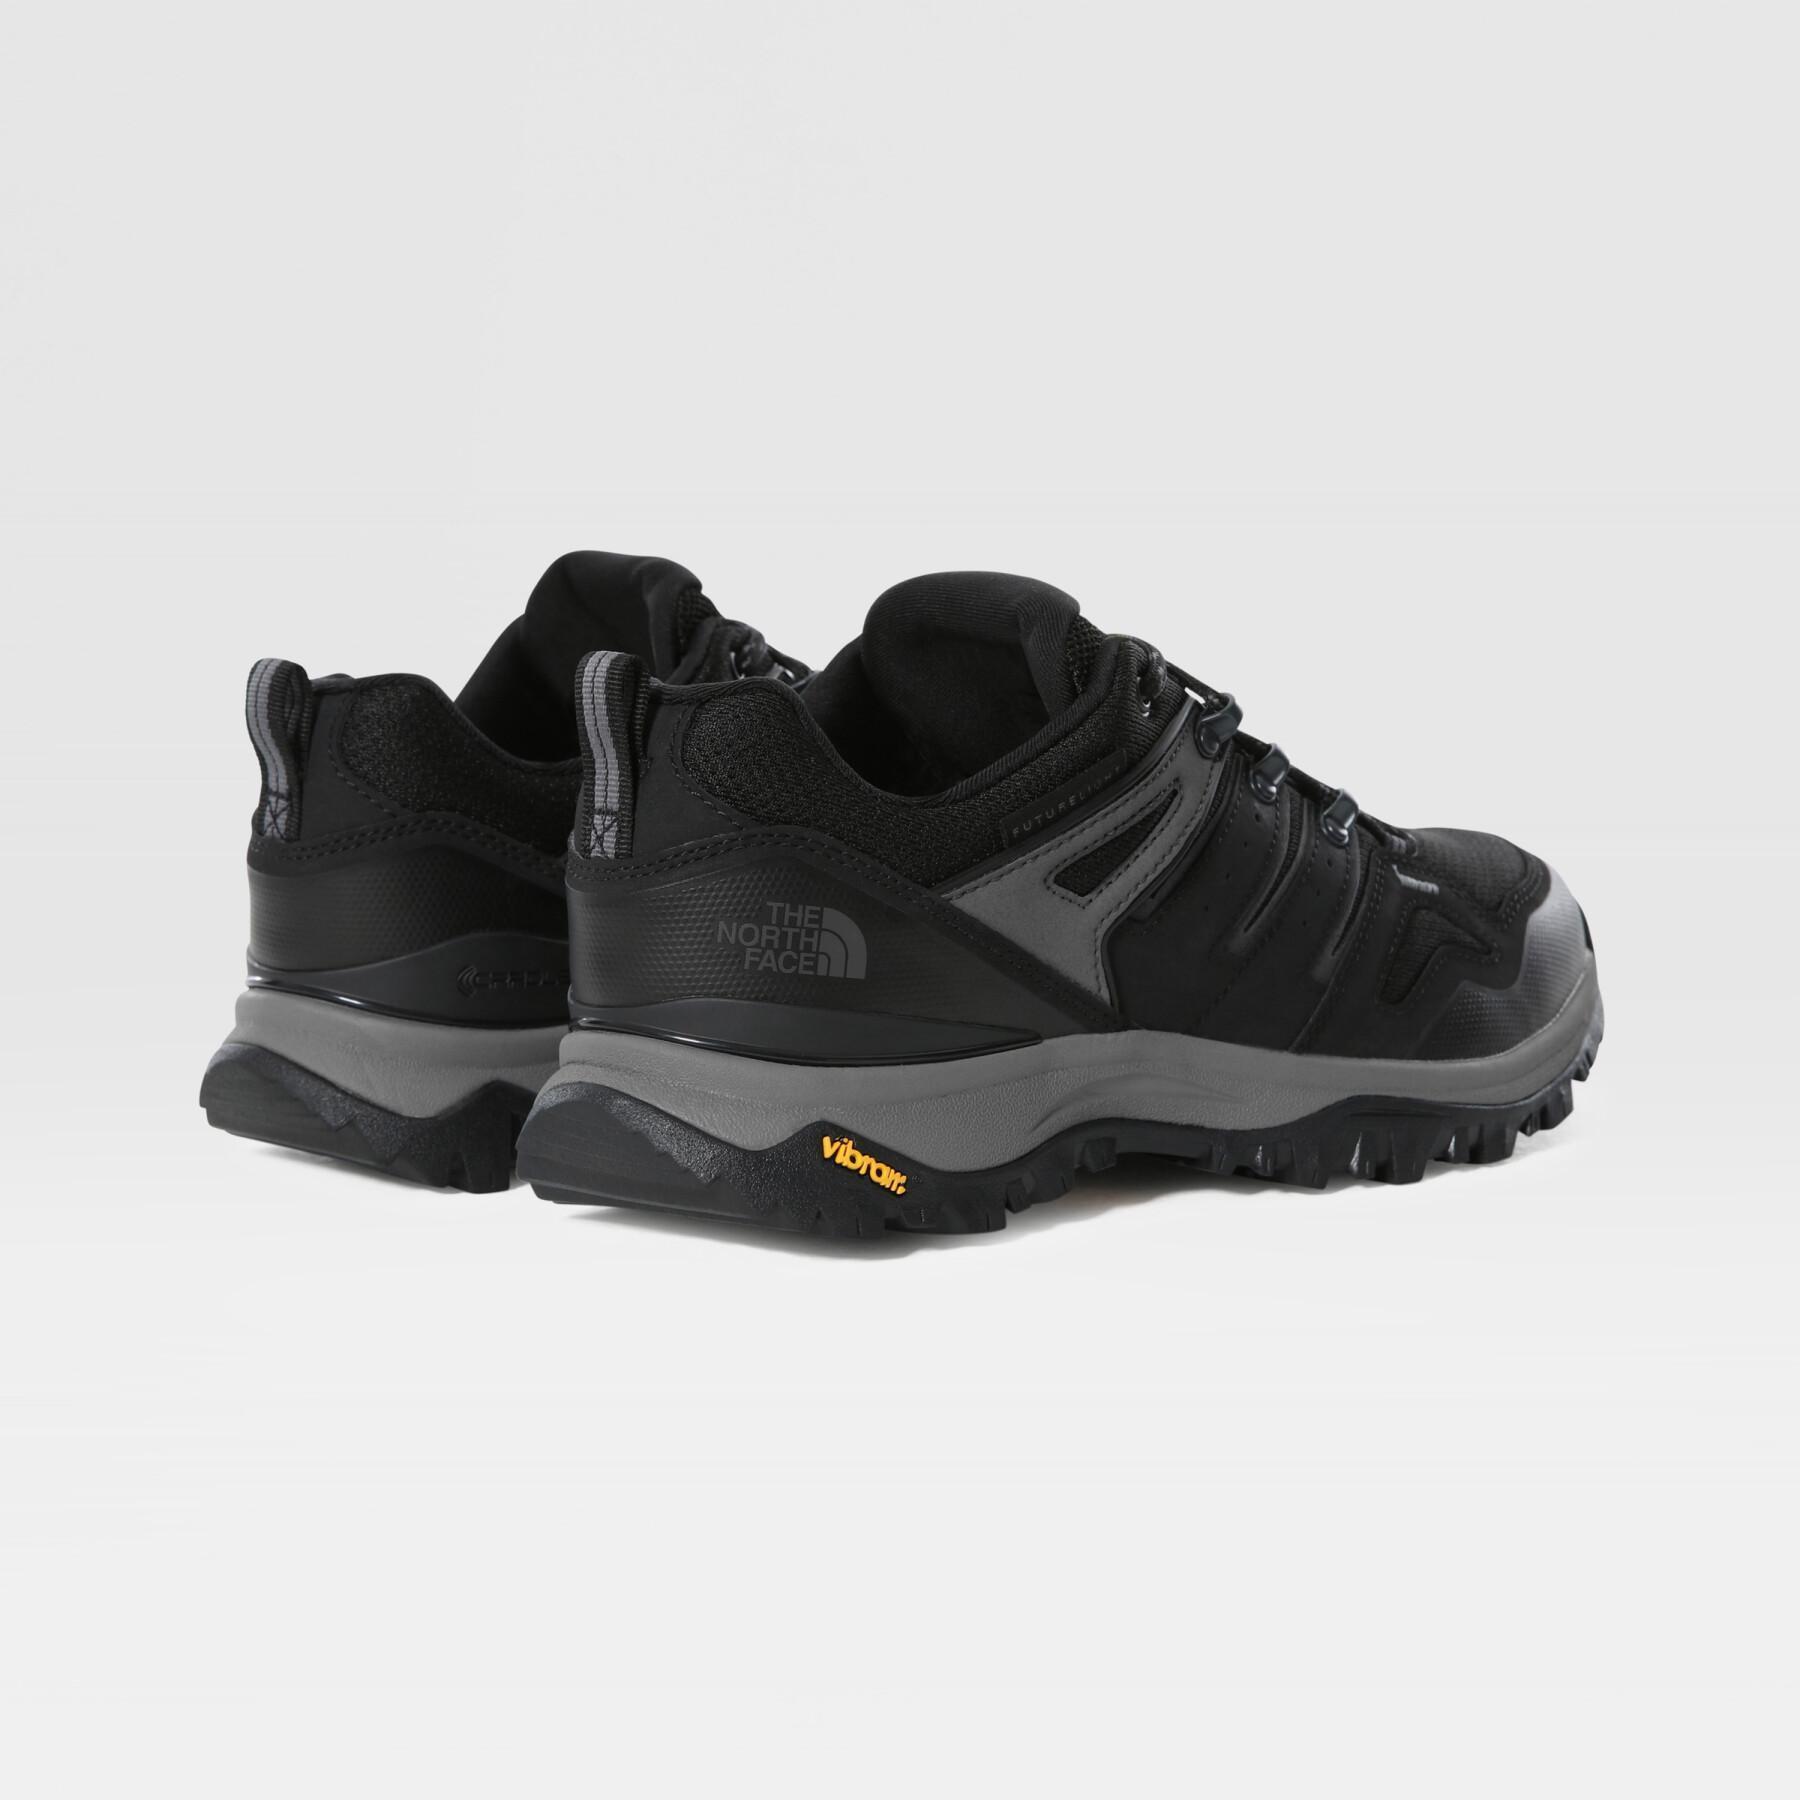 Hiking shoes The North Face Hedgehog Futurelight